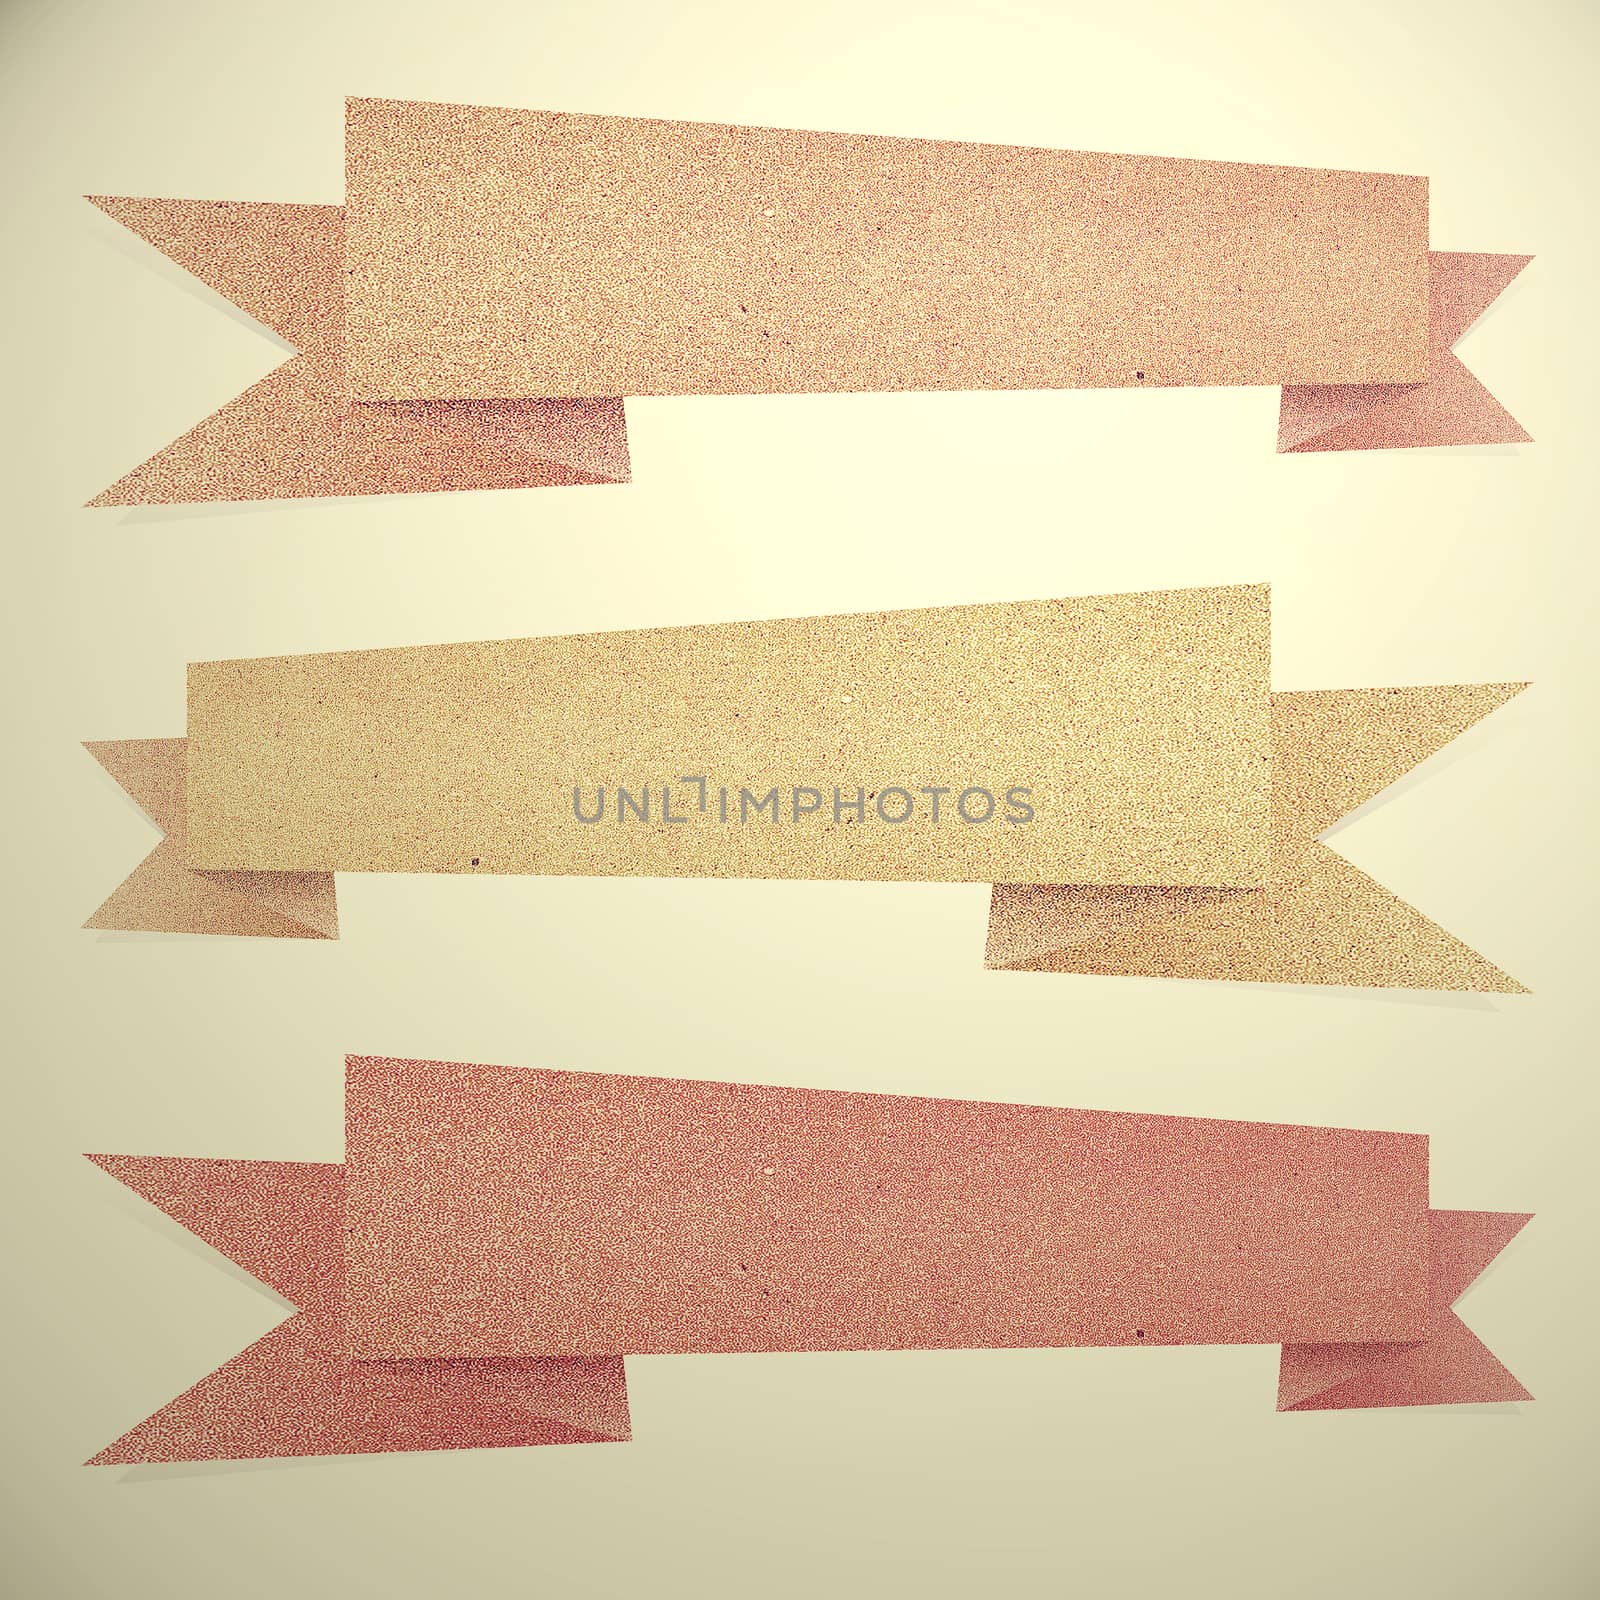 Vintage Paper texture ,Header tag recycled paper on white background